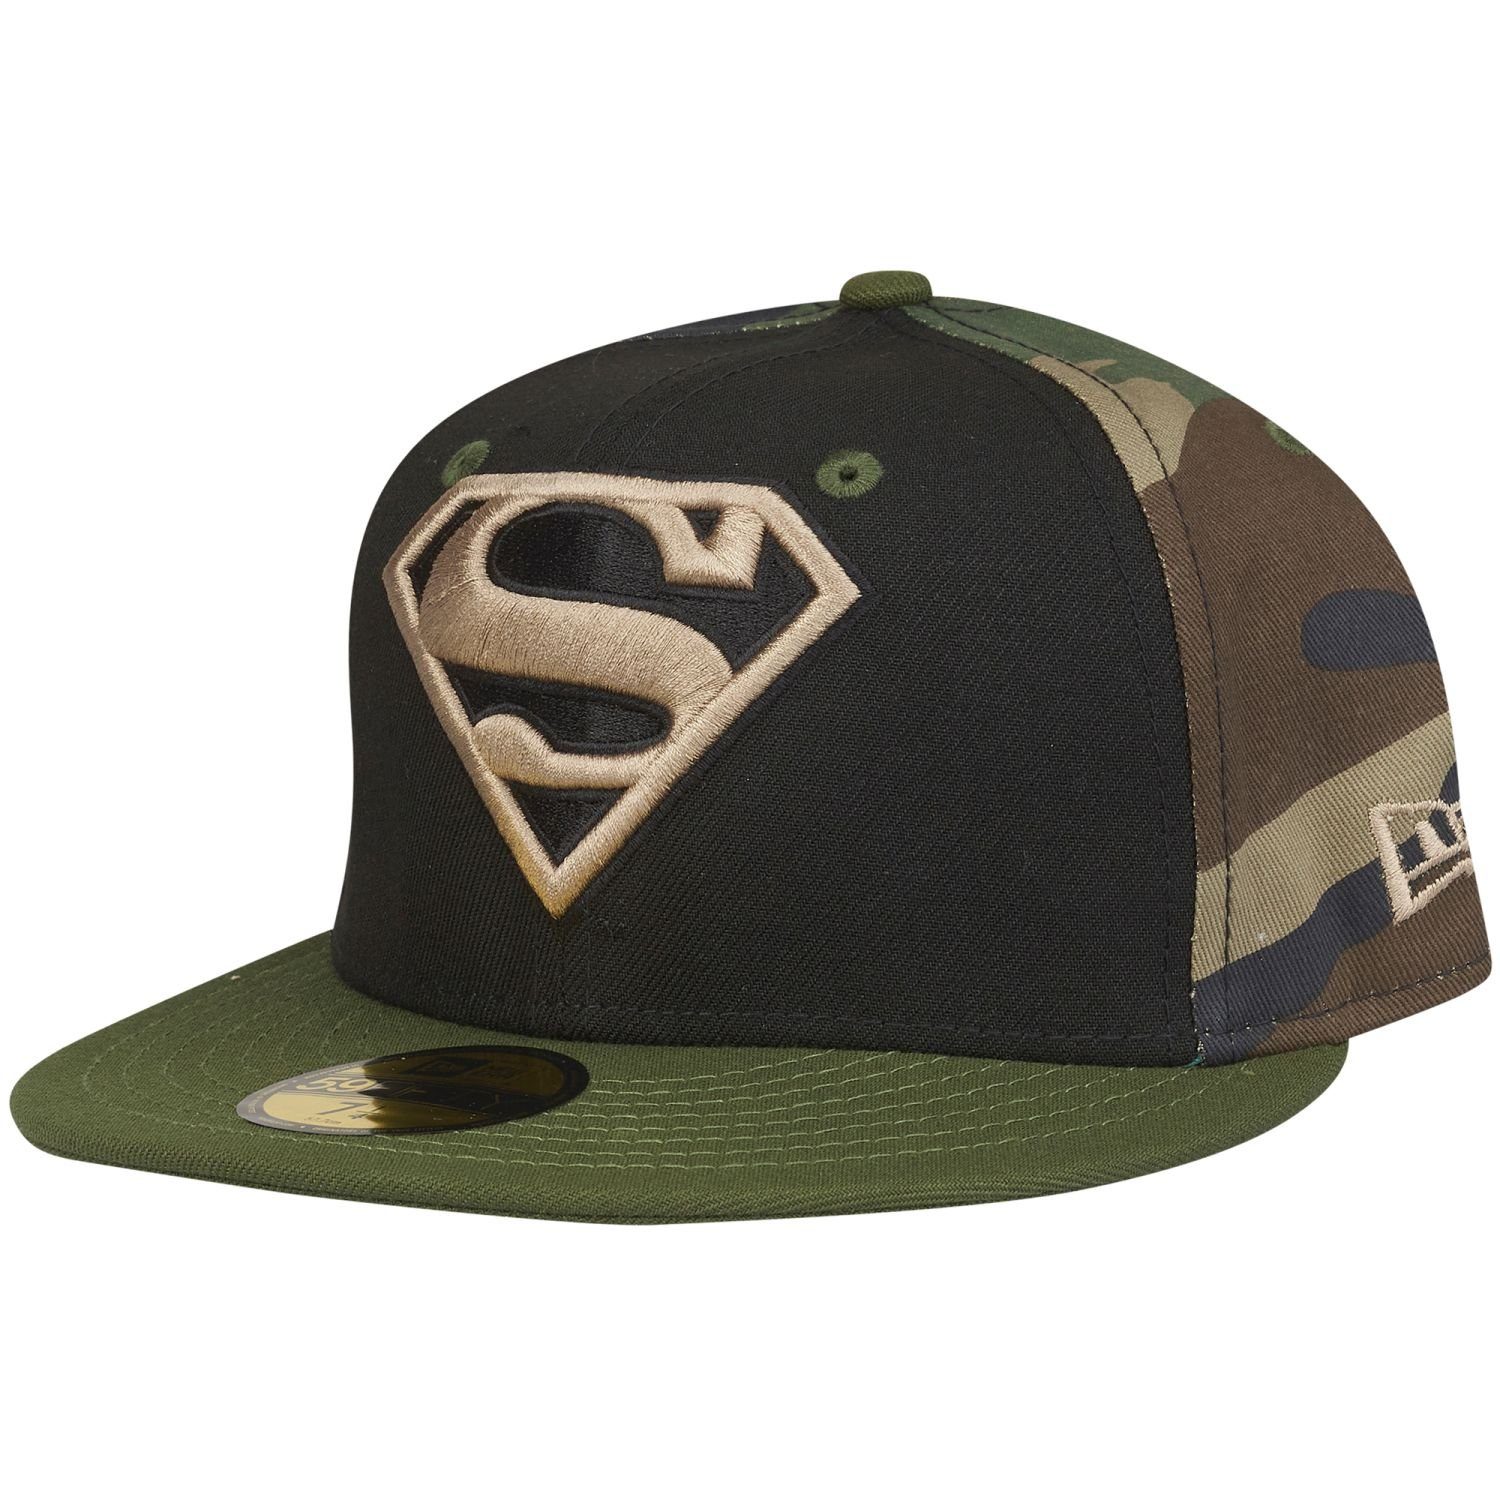 Fitted Era Cap 59Fifty SUPERMAN New woodland